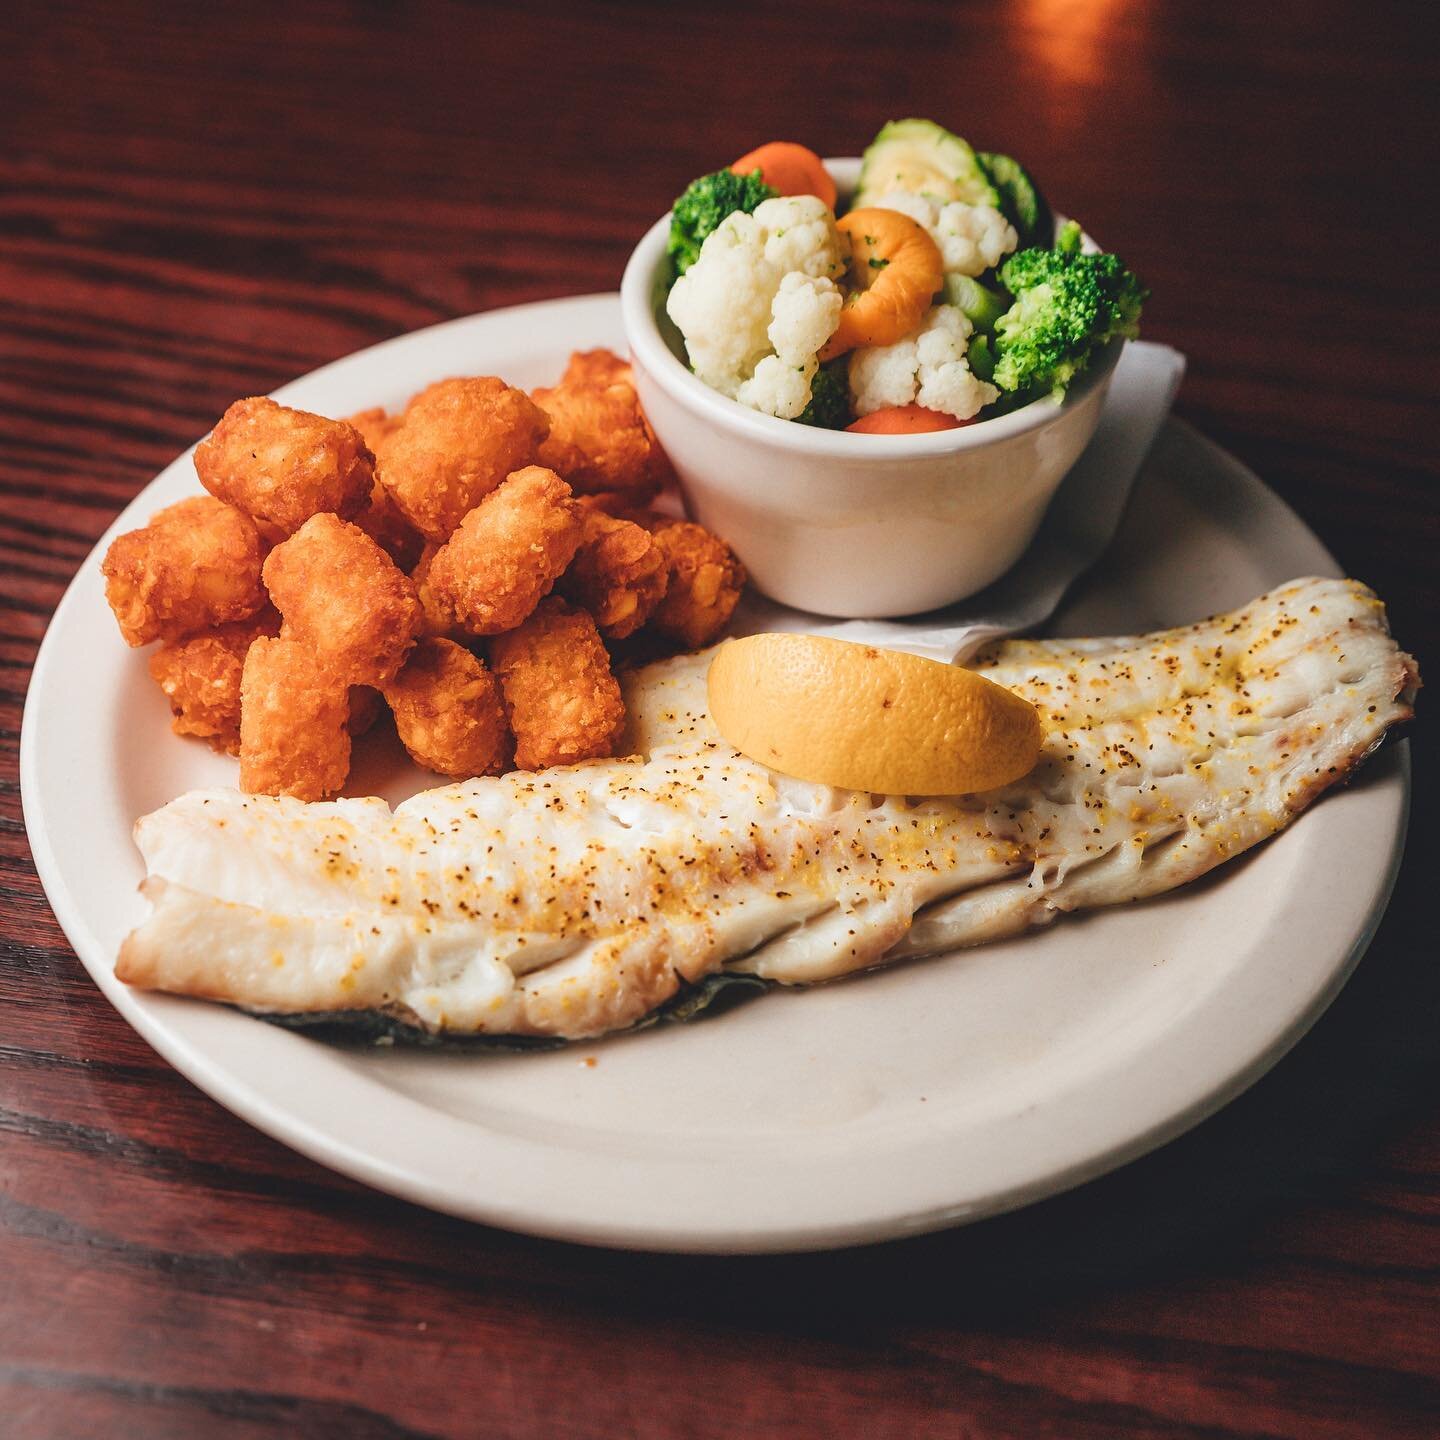 Did ya know we also offer a broiled version of our Friday Fish Dinner? We&rsquo;re stoked for Fry Day and we&rsquo;re busting out orders. Get yours at the link in our bio! 👊🏼